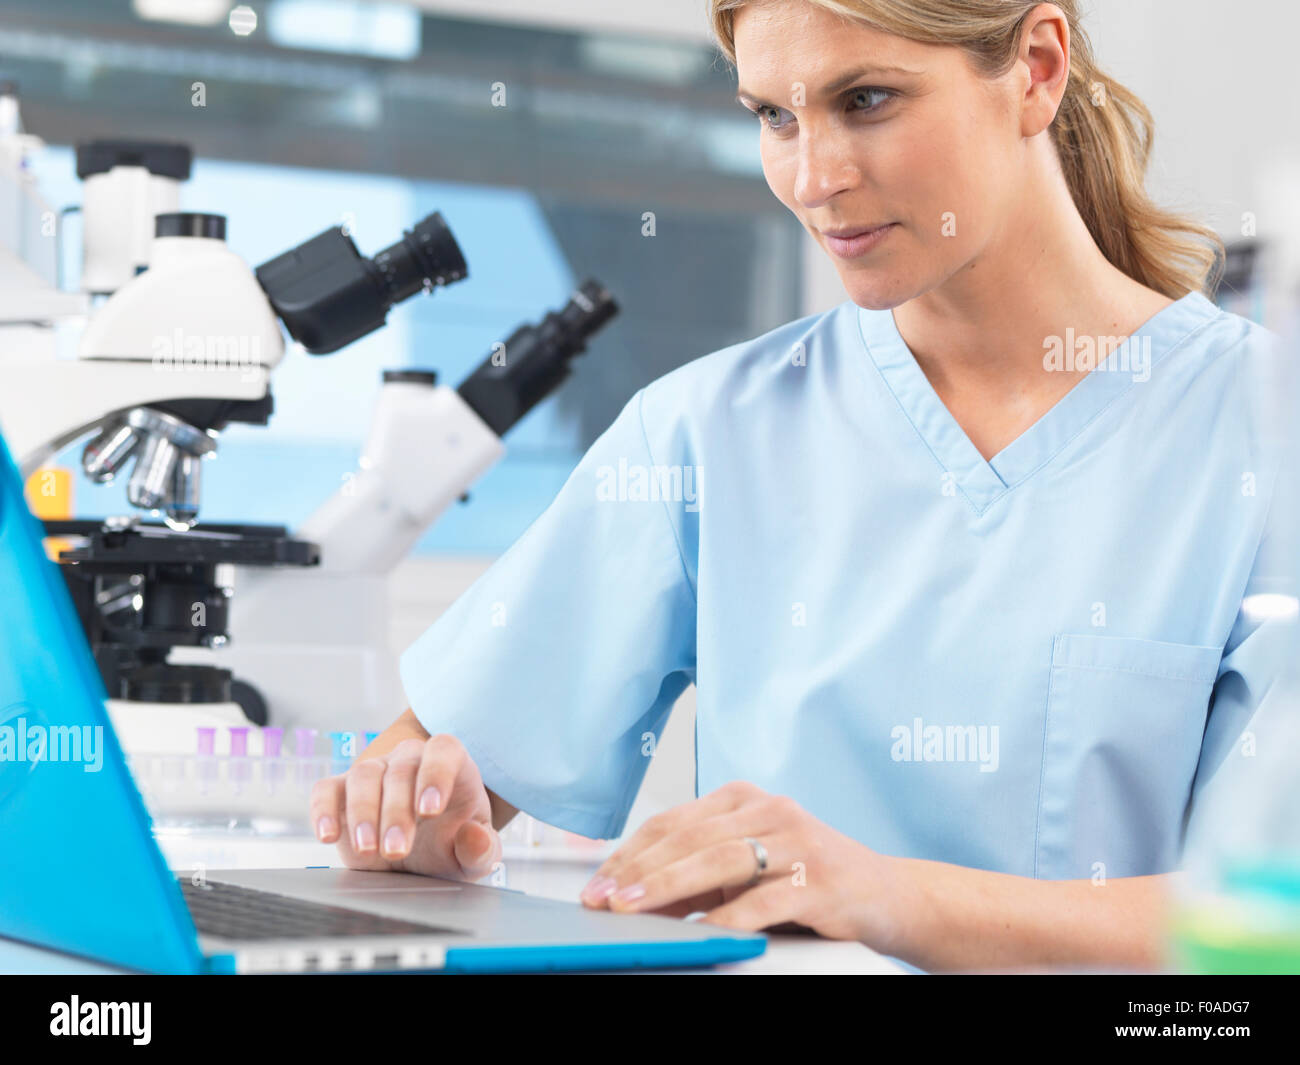 Medical scientist viewing patients test results on a computer Stock Photo